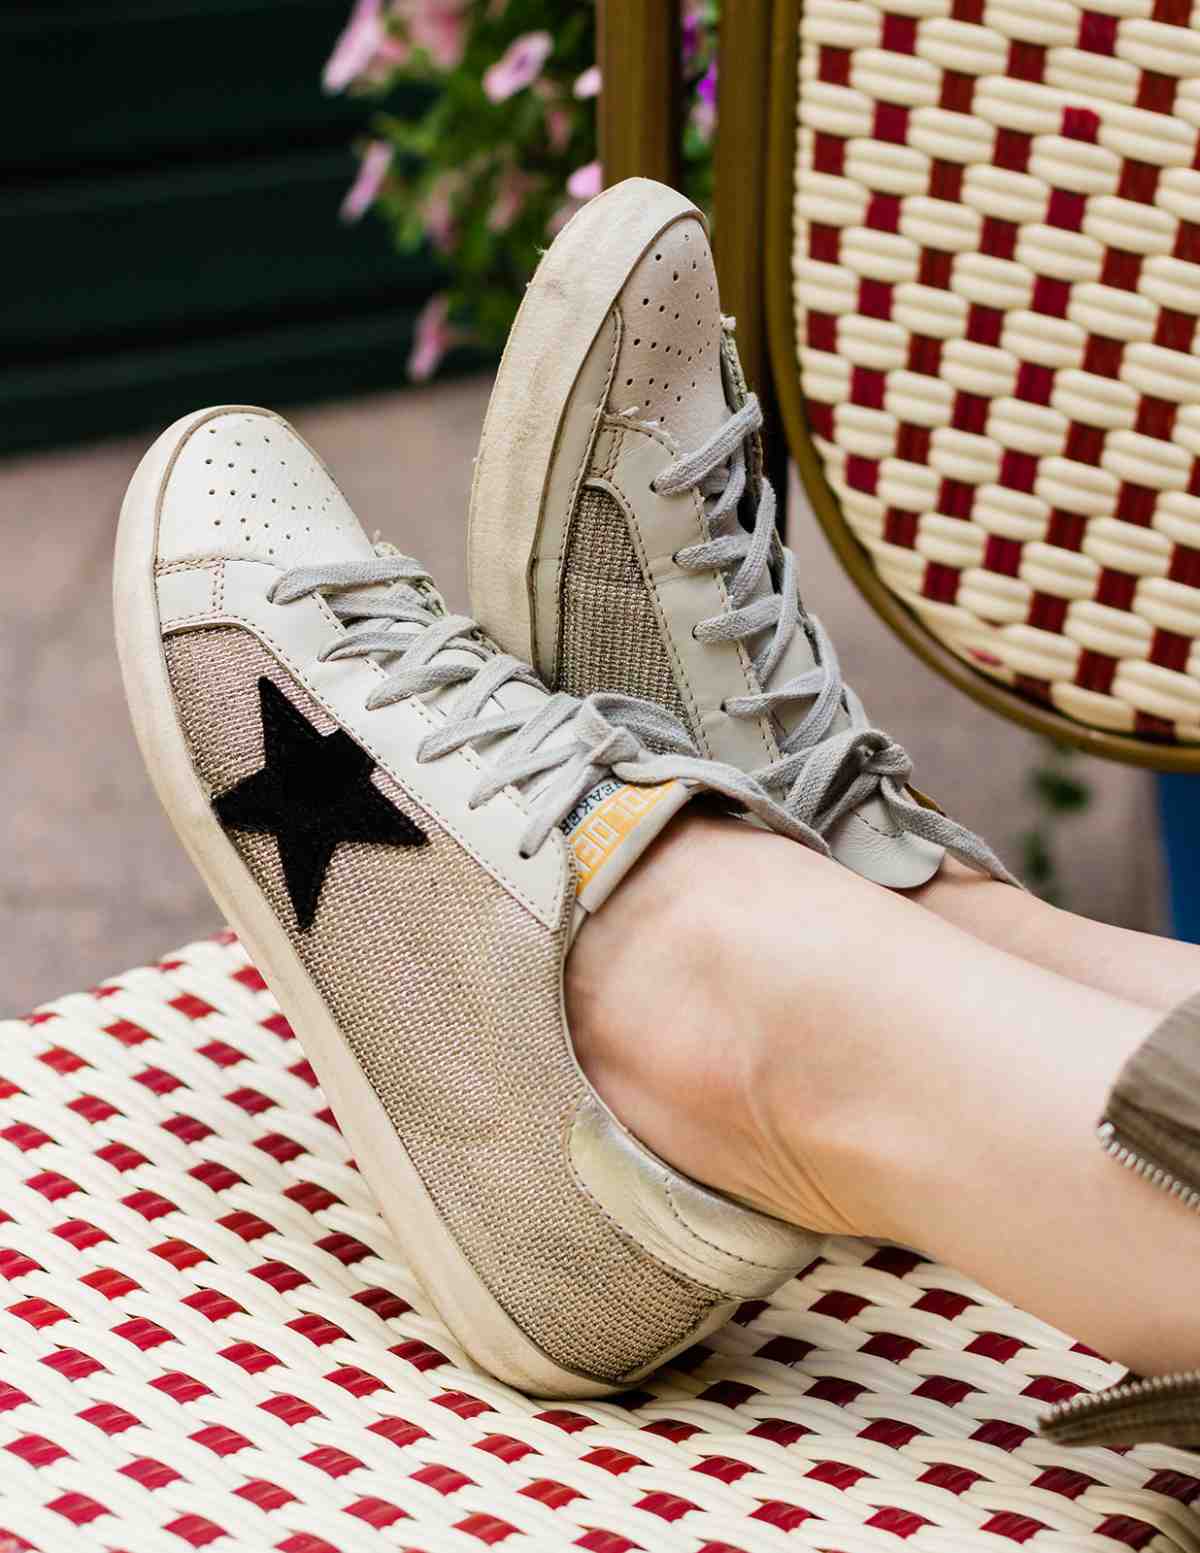 Close up of woman's feet wearing off-white golden goose star sneakers on a woven chair.